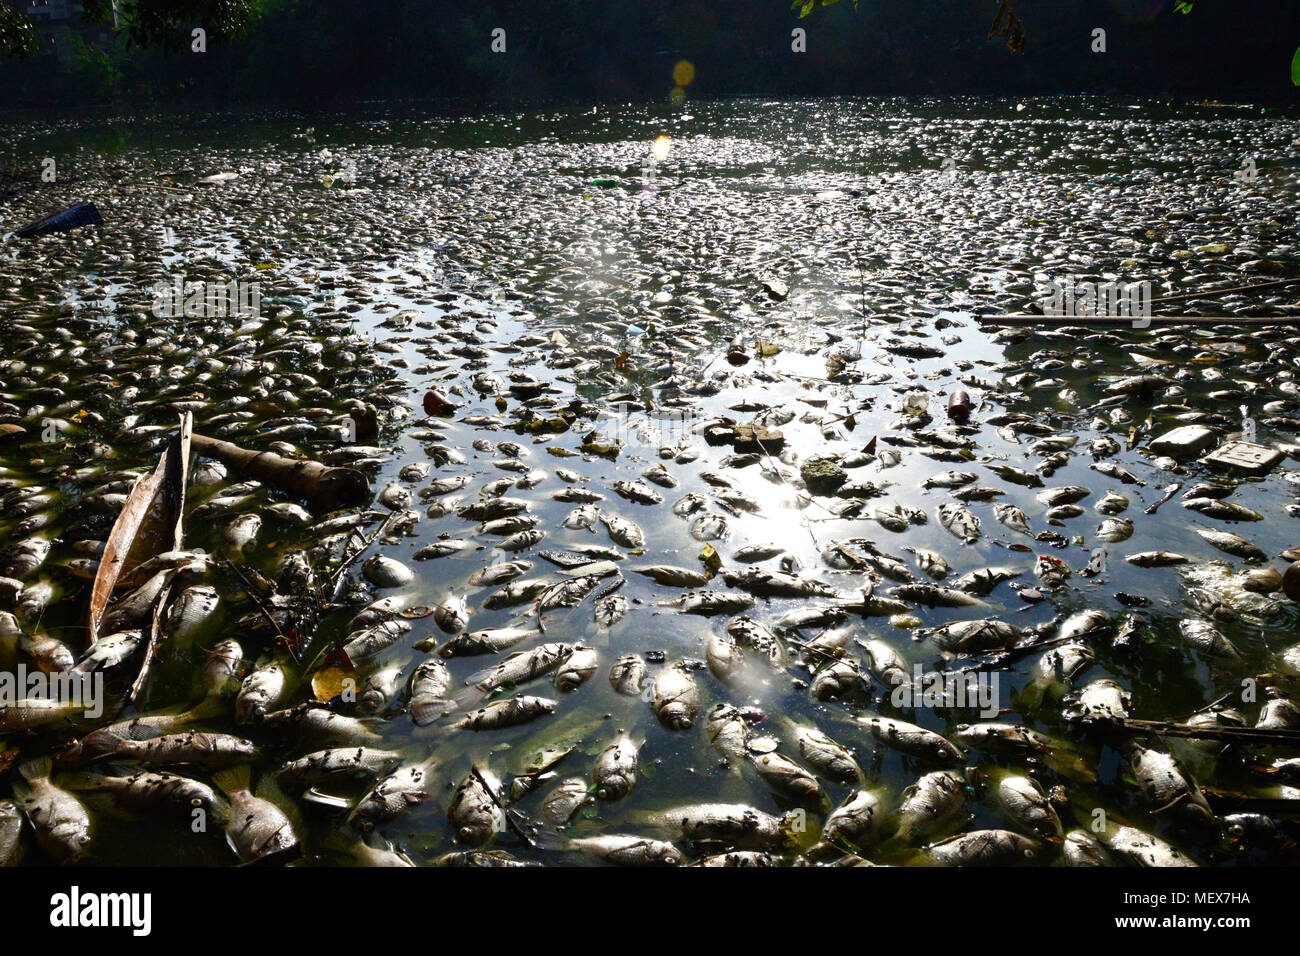 Thousands of dead fishes float in the Uttara Lake in Dhaka City, Bangladesh, on November 11, 2017. Chemical pollutions or abnormal change in the pH (p Stock Photo